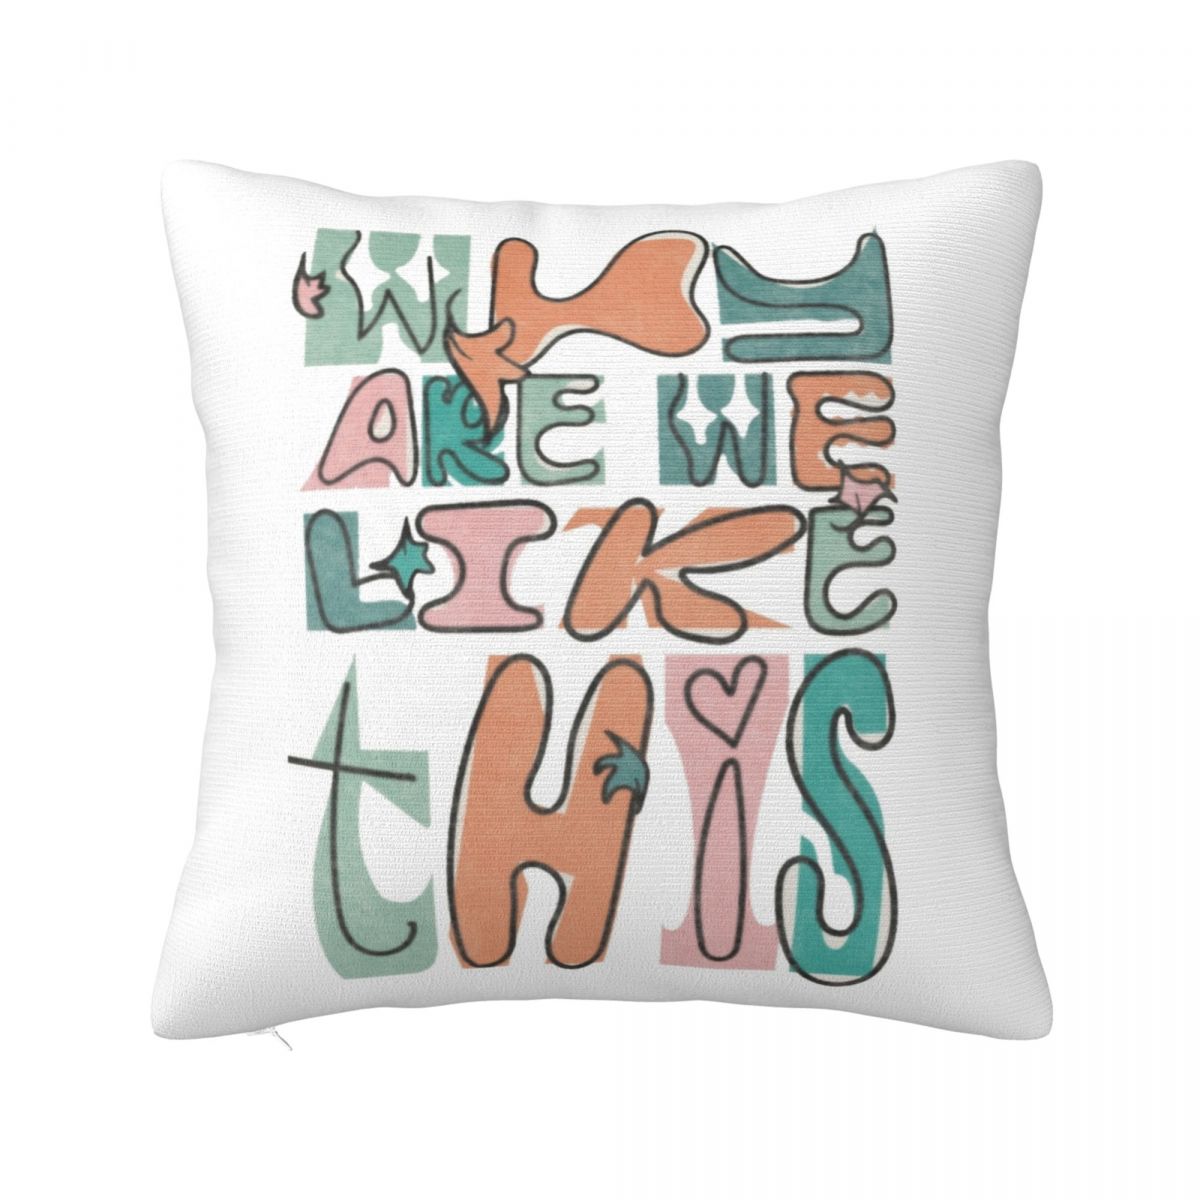 Heartstopper Square Pillow Covers Polyester Sofa Kit Connor Oseman Charlie Nick Boys Love Cushion Case Funny Pillowcase 40*40